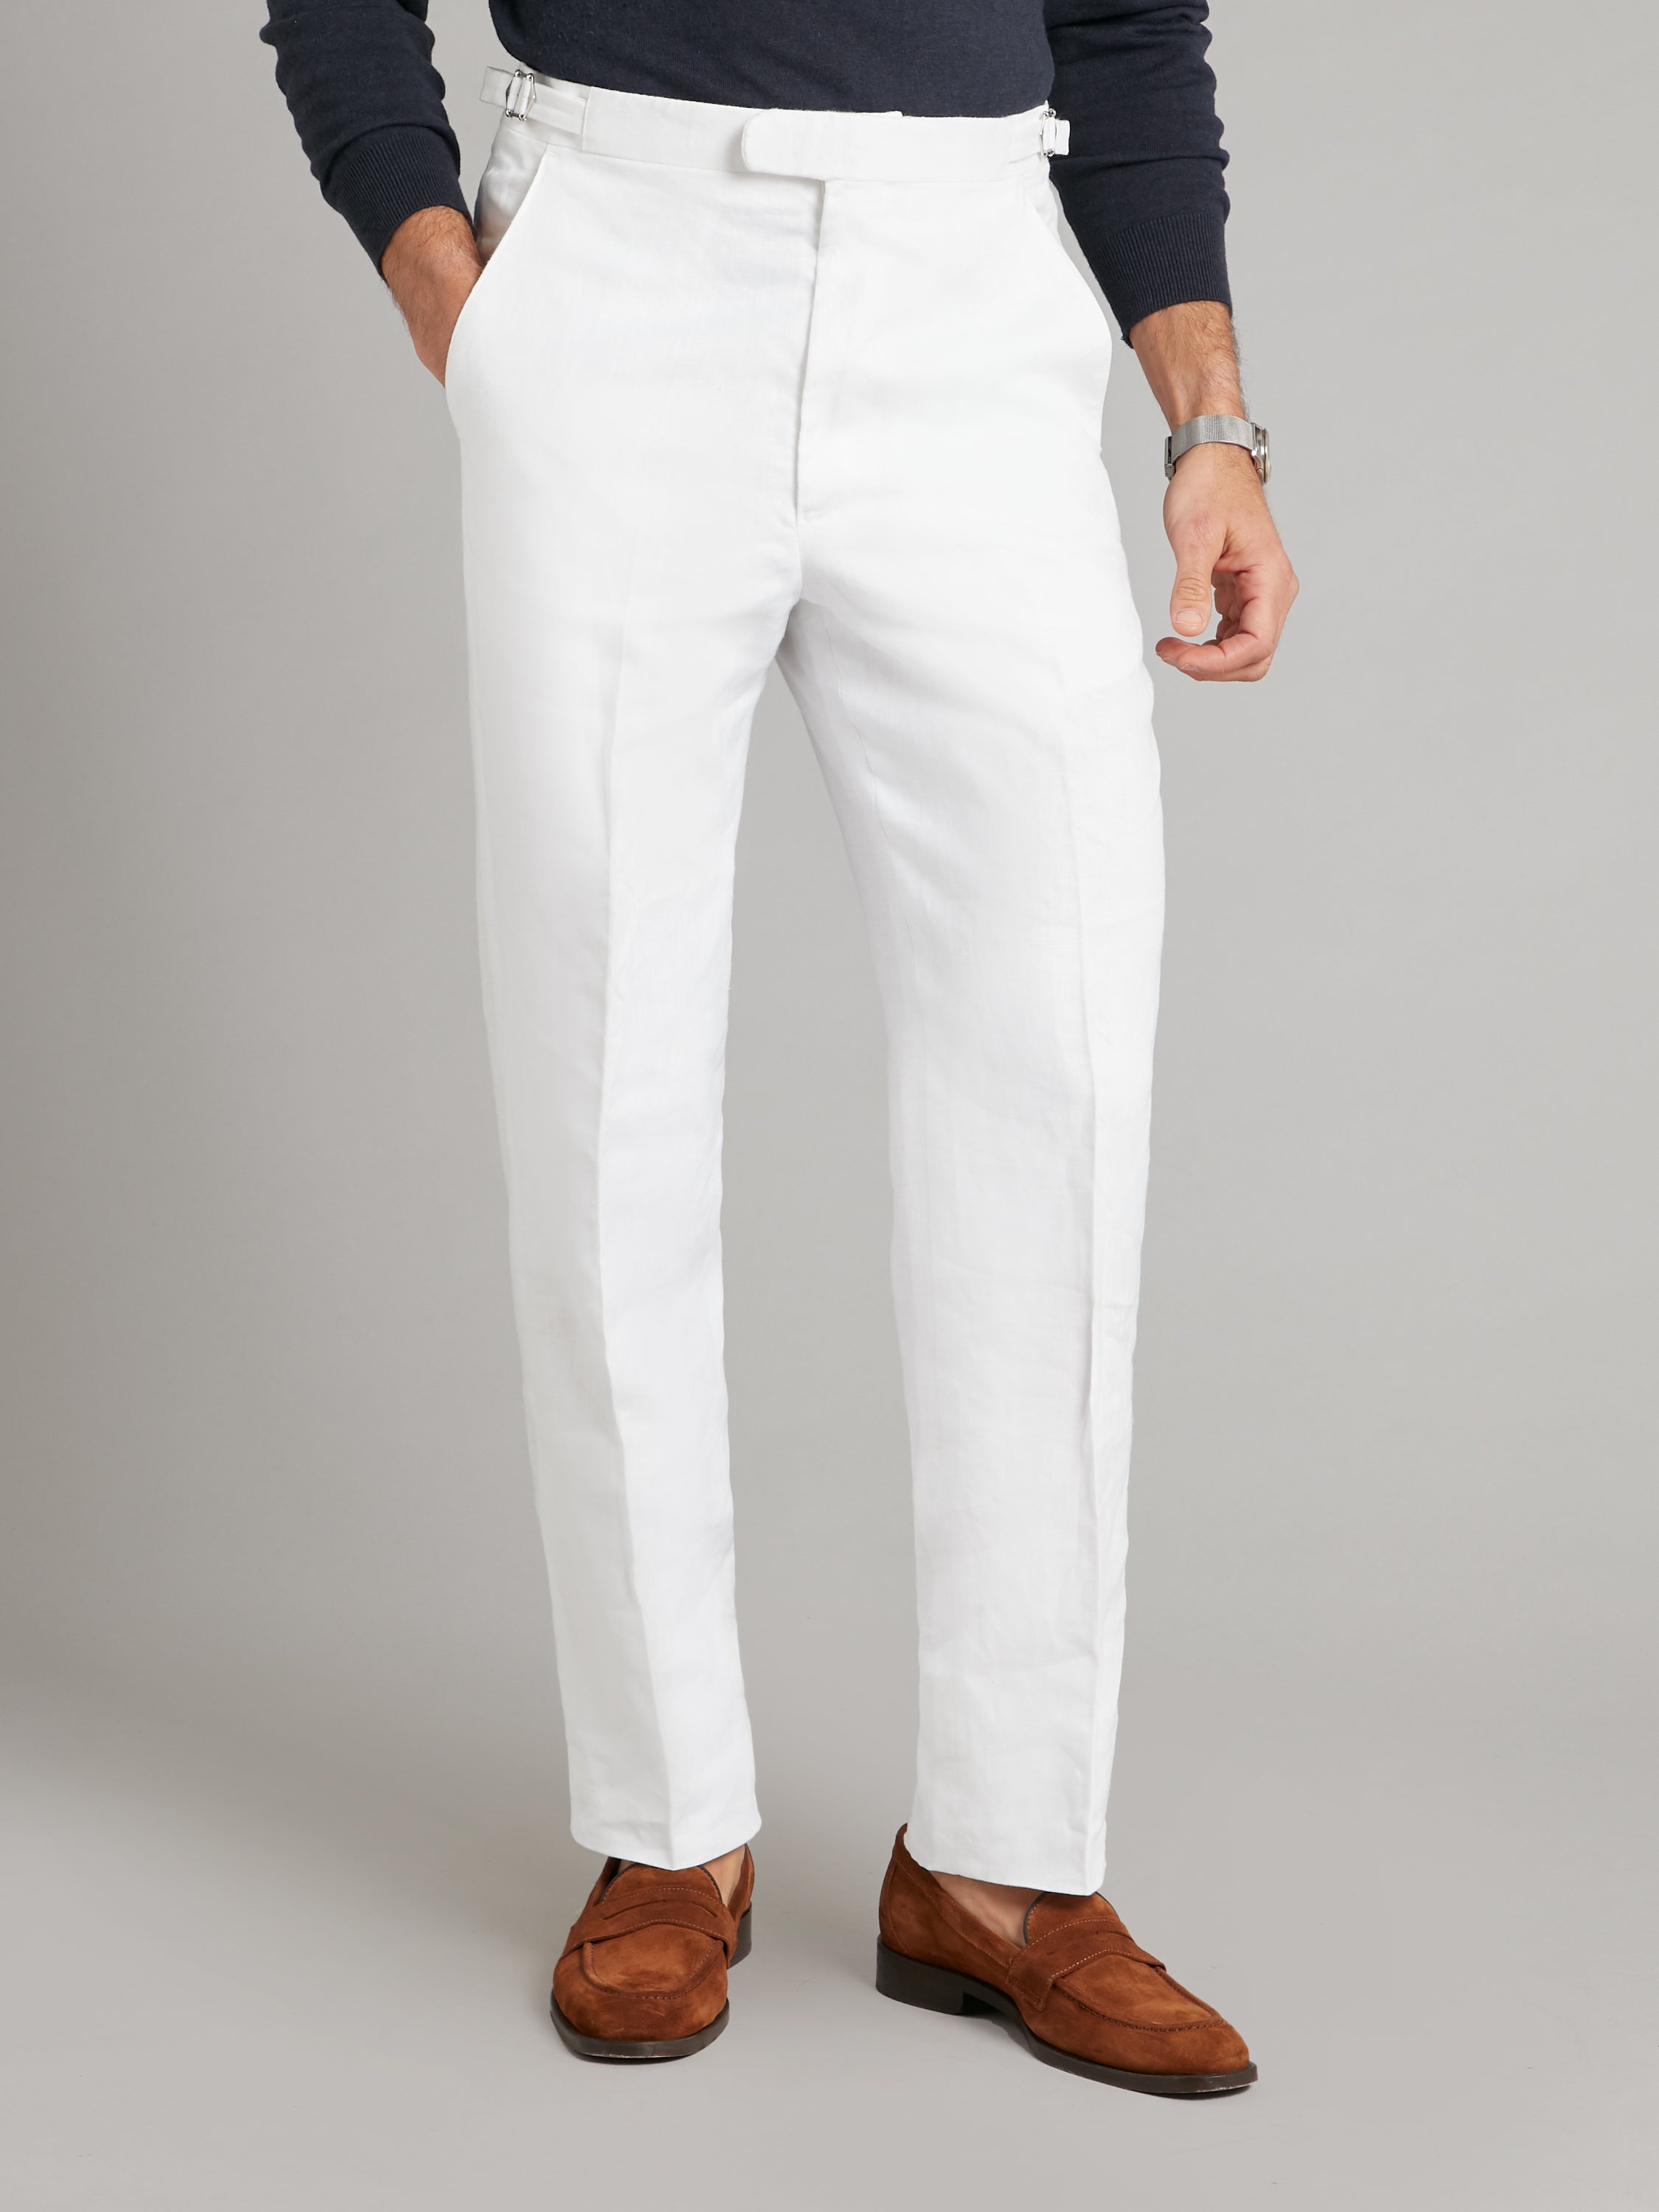 Buy White Linen Pants Online In India  Etsy India